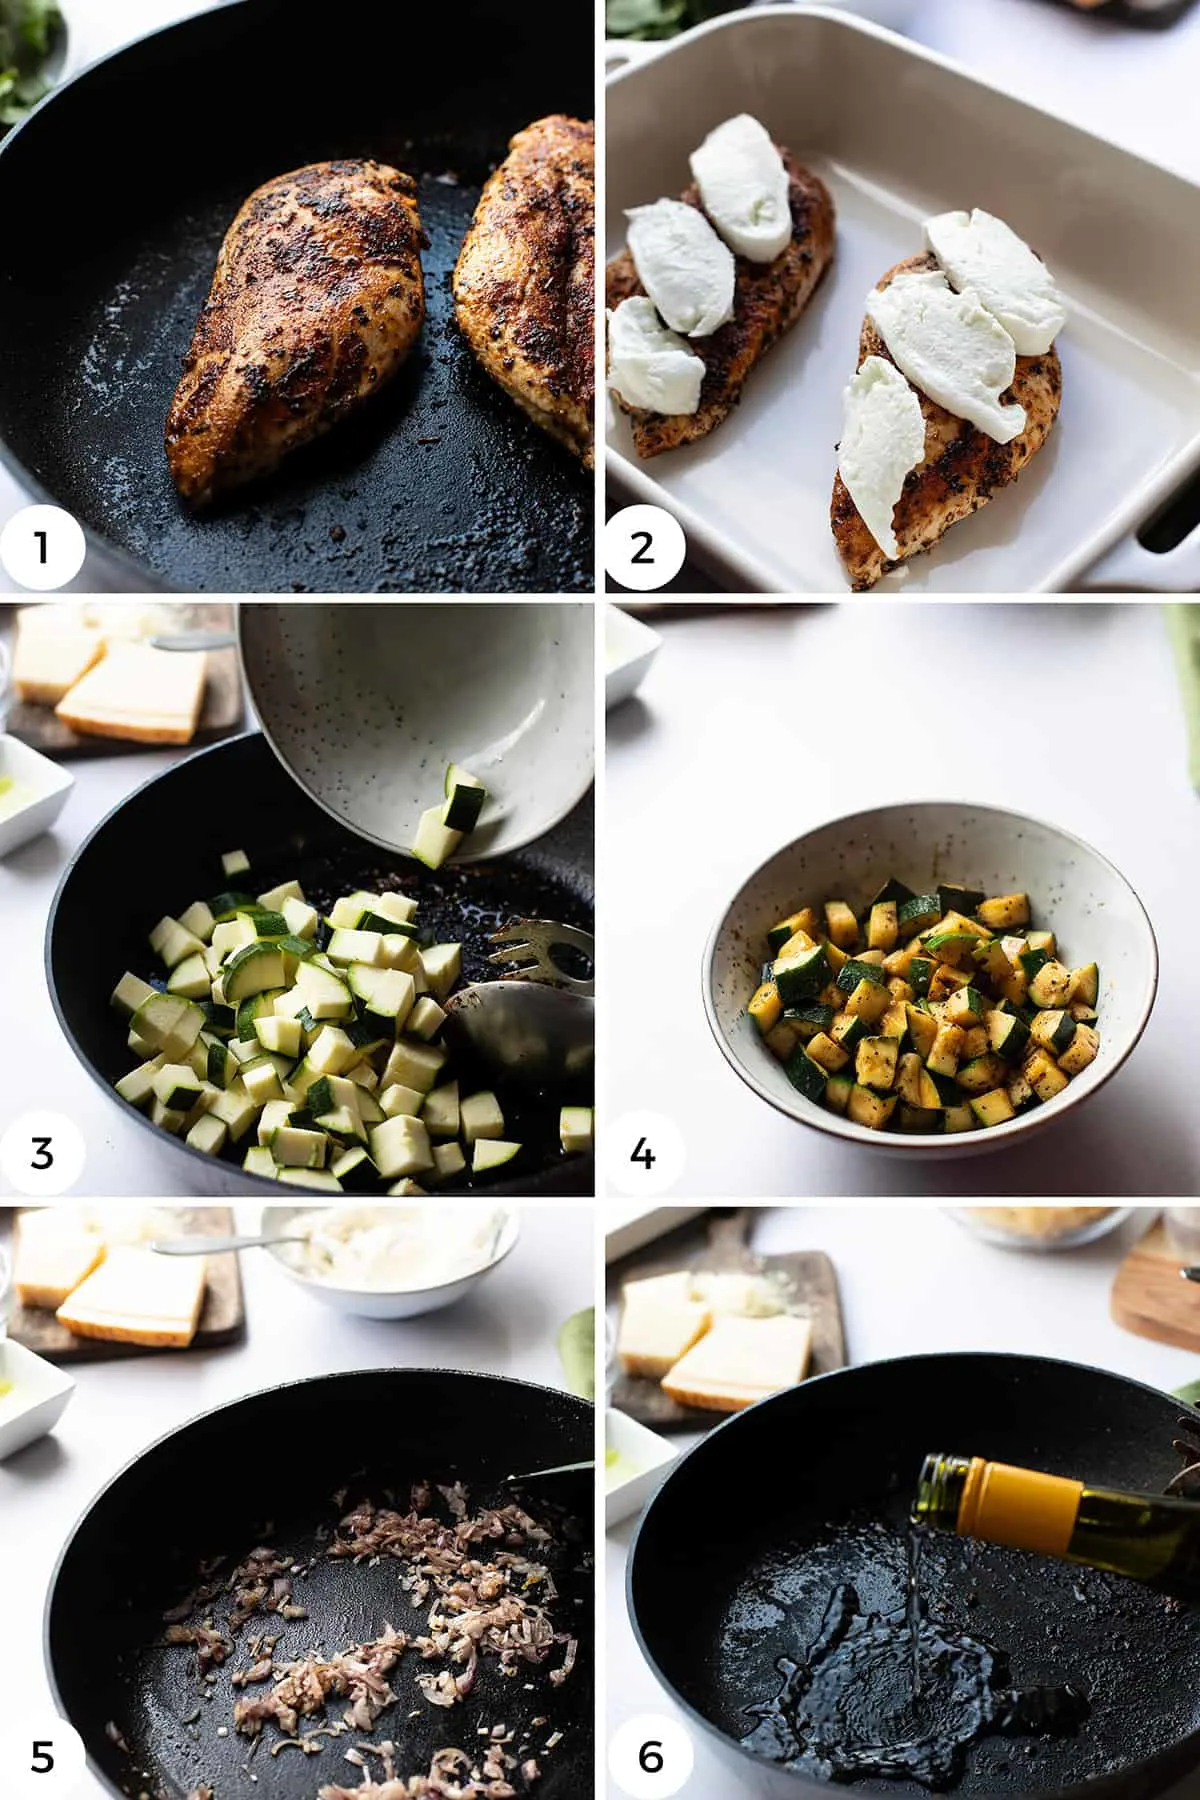 Steps to make the chicken and zucchini.